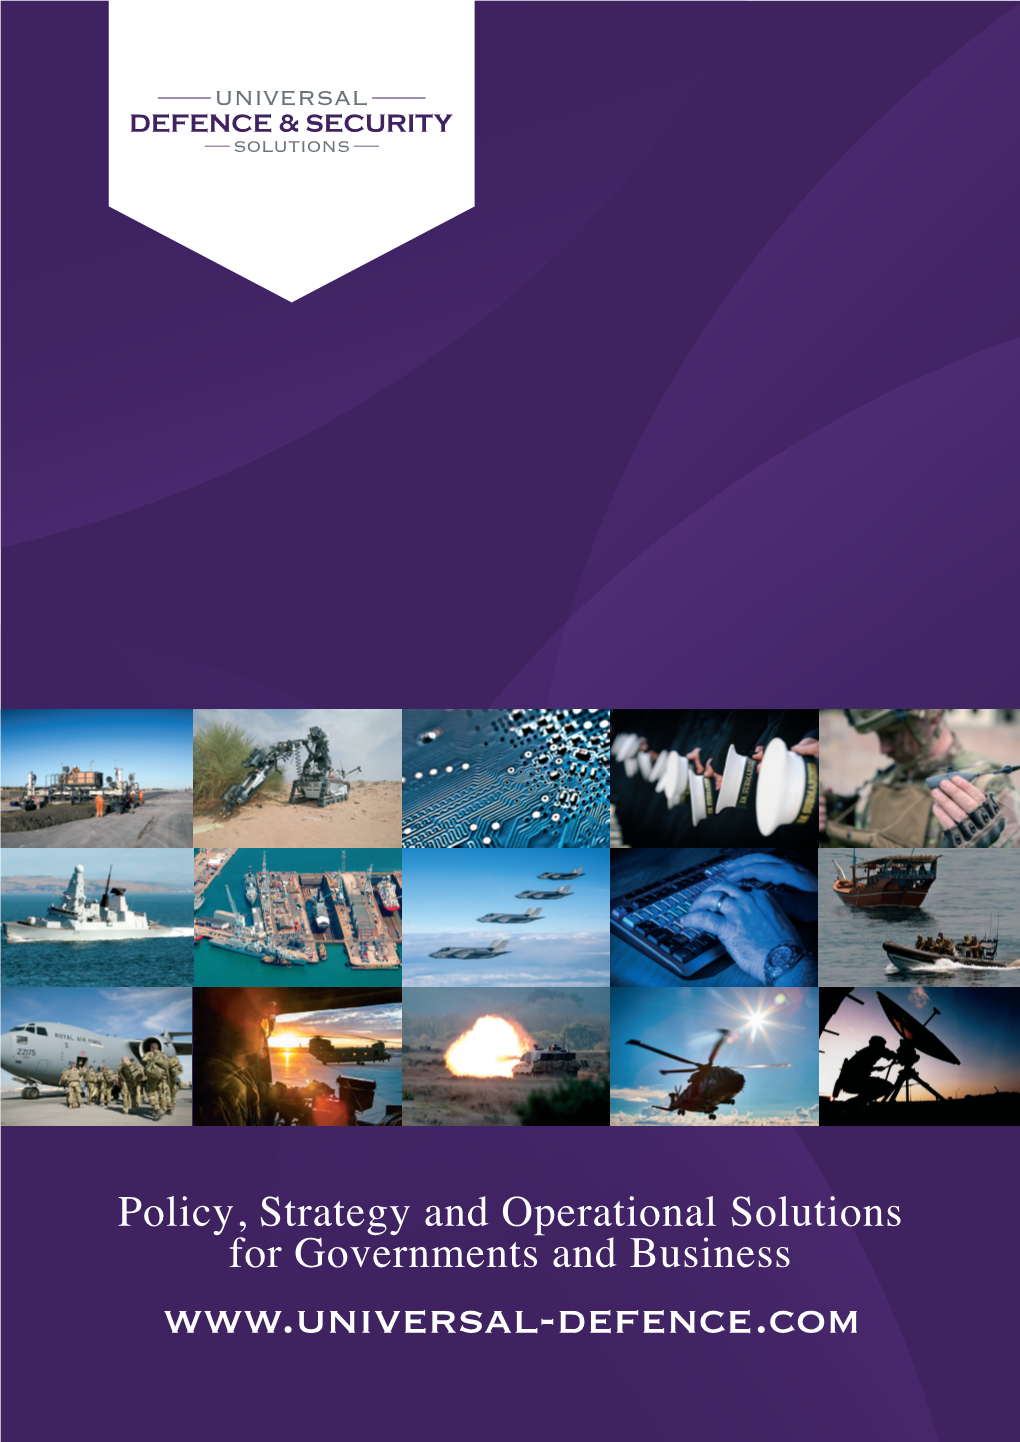 Policy, Strategy and Operational Solutions for Governments and Business OVERVIEW